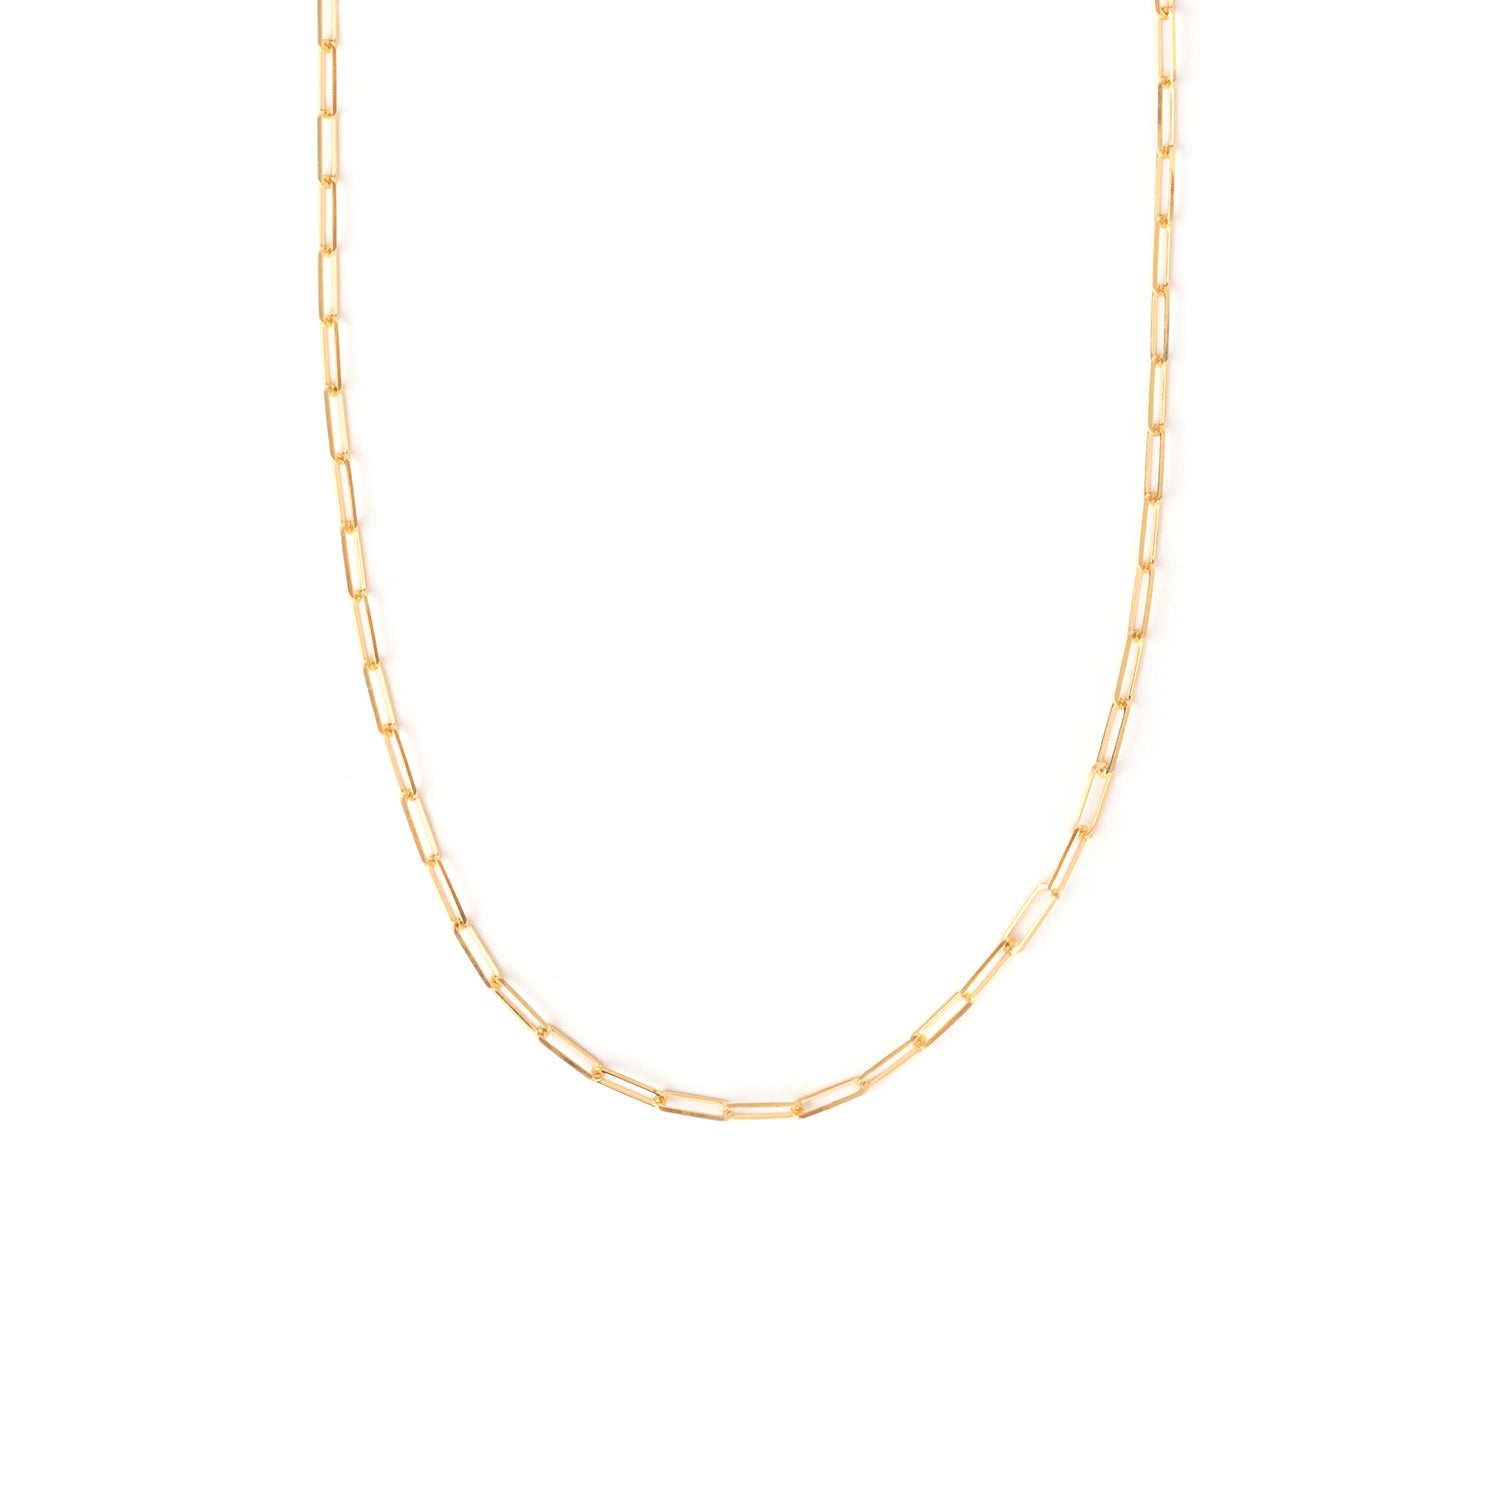 Bloomingdale's Bloomingdale's Paper Clip Link Chain Necklace in 14K Yellow  Gold - 100% Exclusive | Bloomingdale's